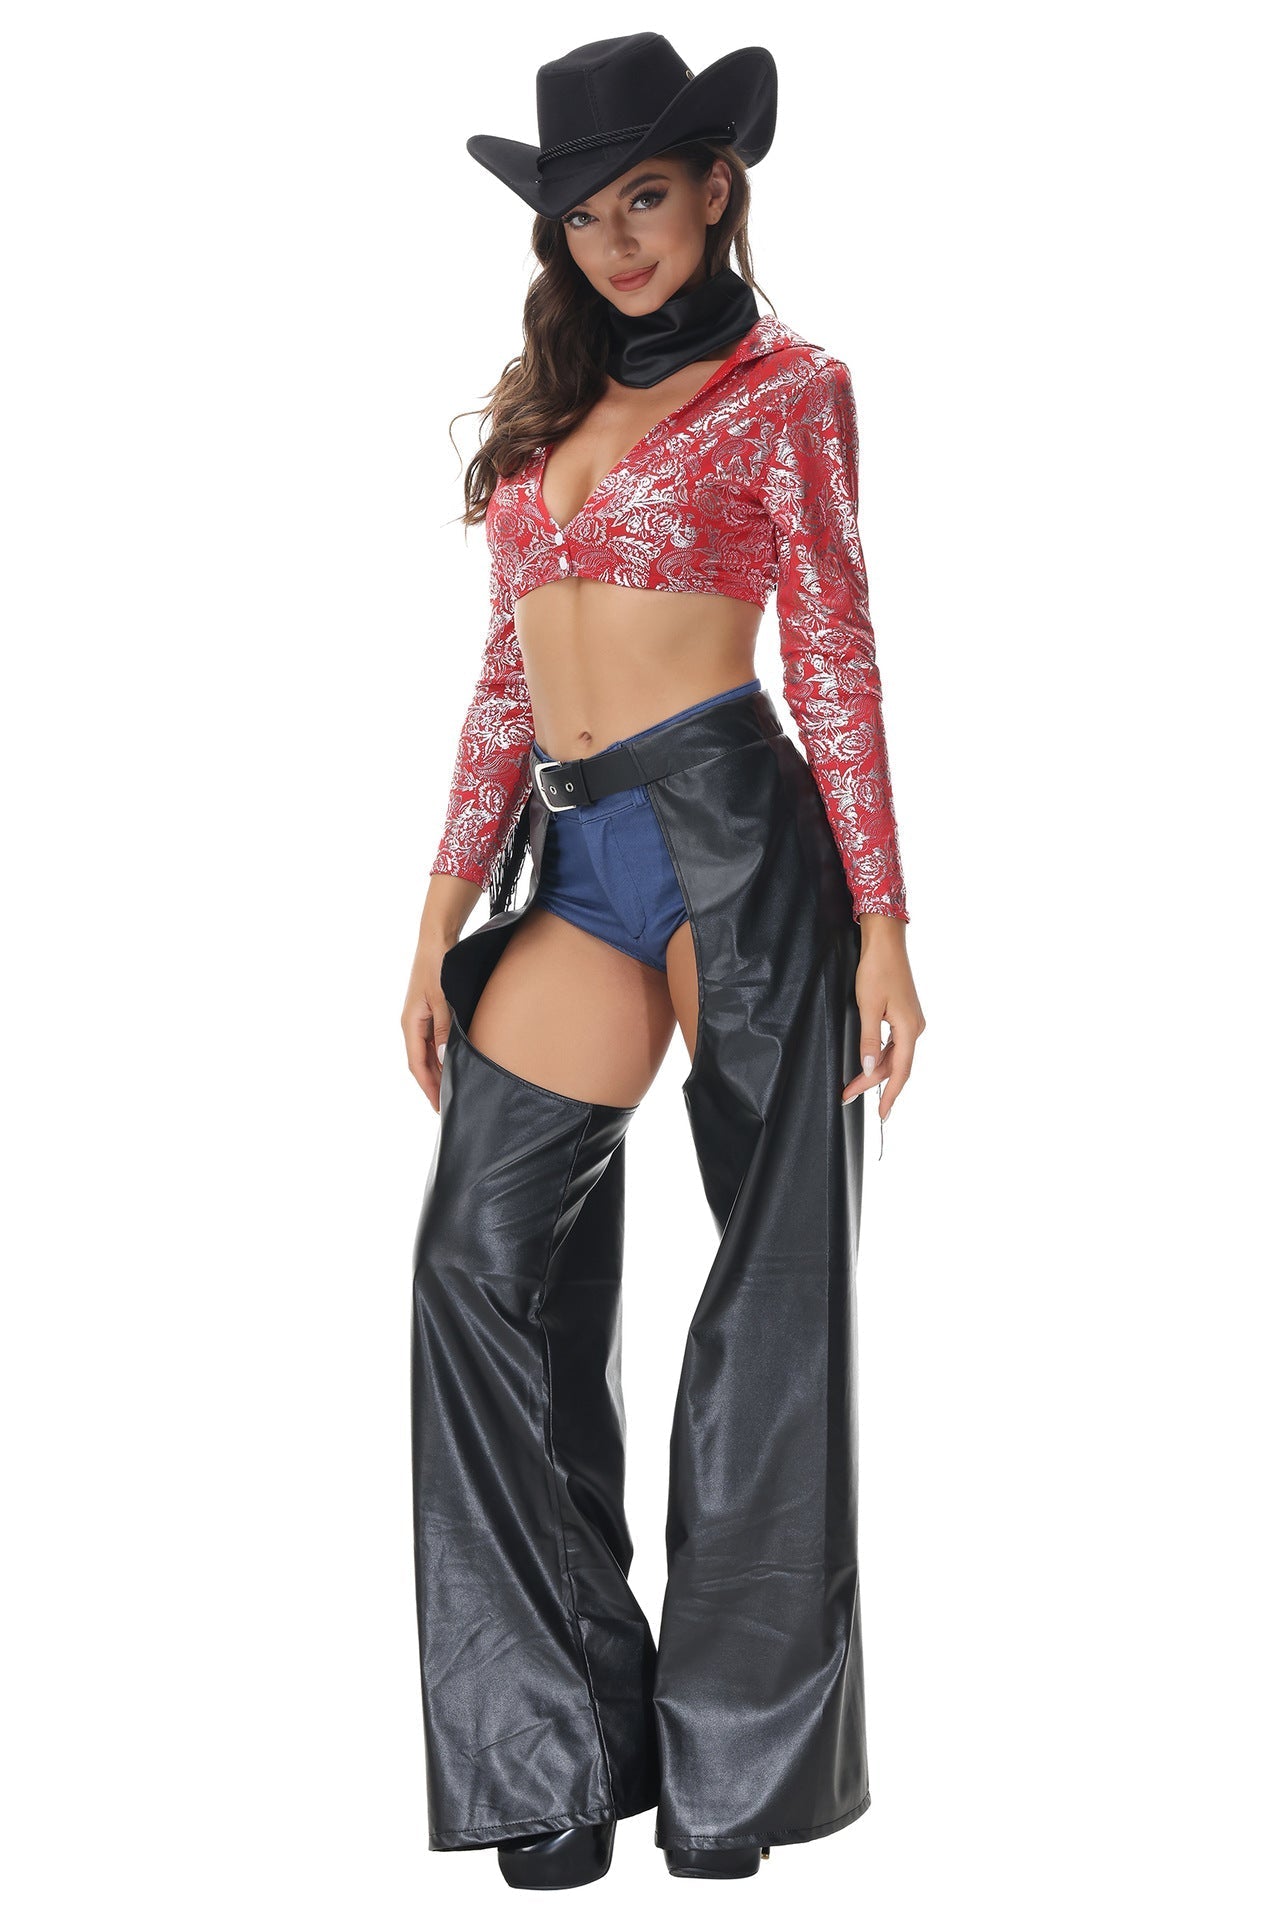 Black Fringe Bell Bottom Cowgirl Rodeo Outfit Western High Waisted Stretch Pants  Party Style -  Canada